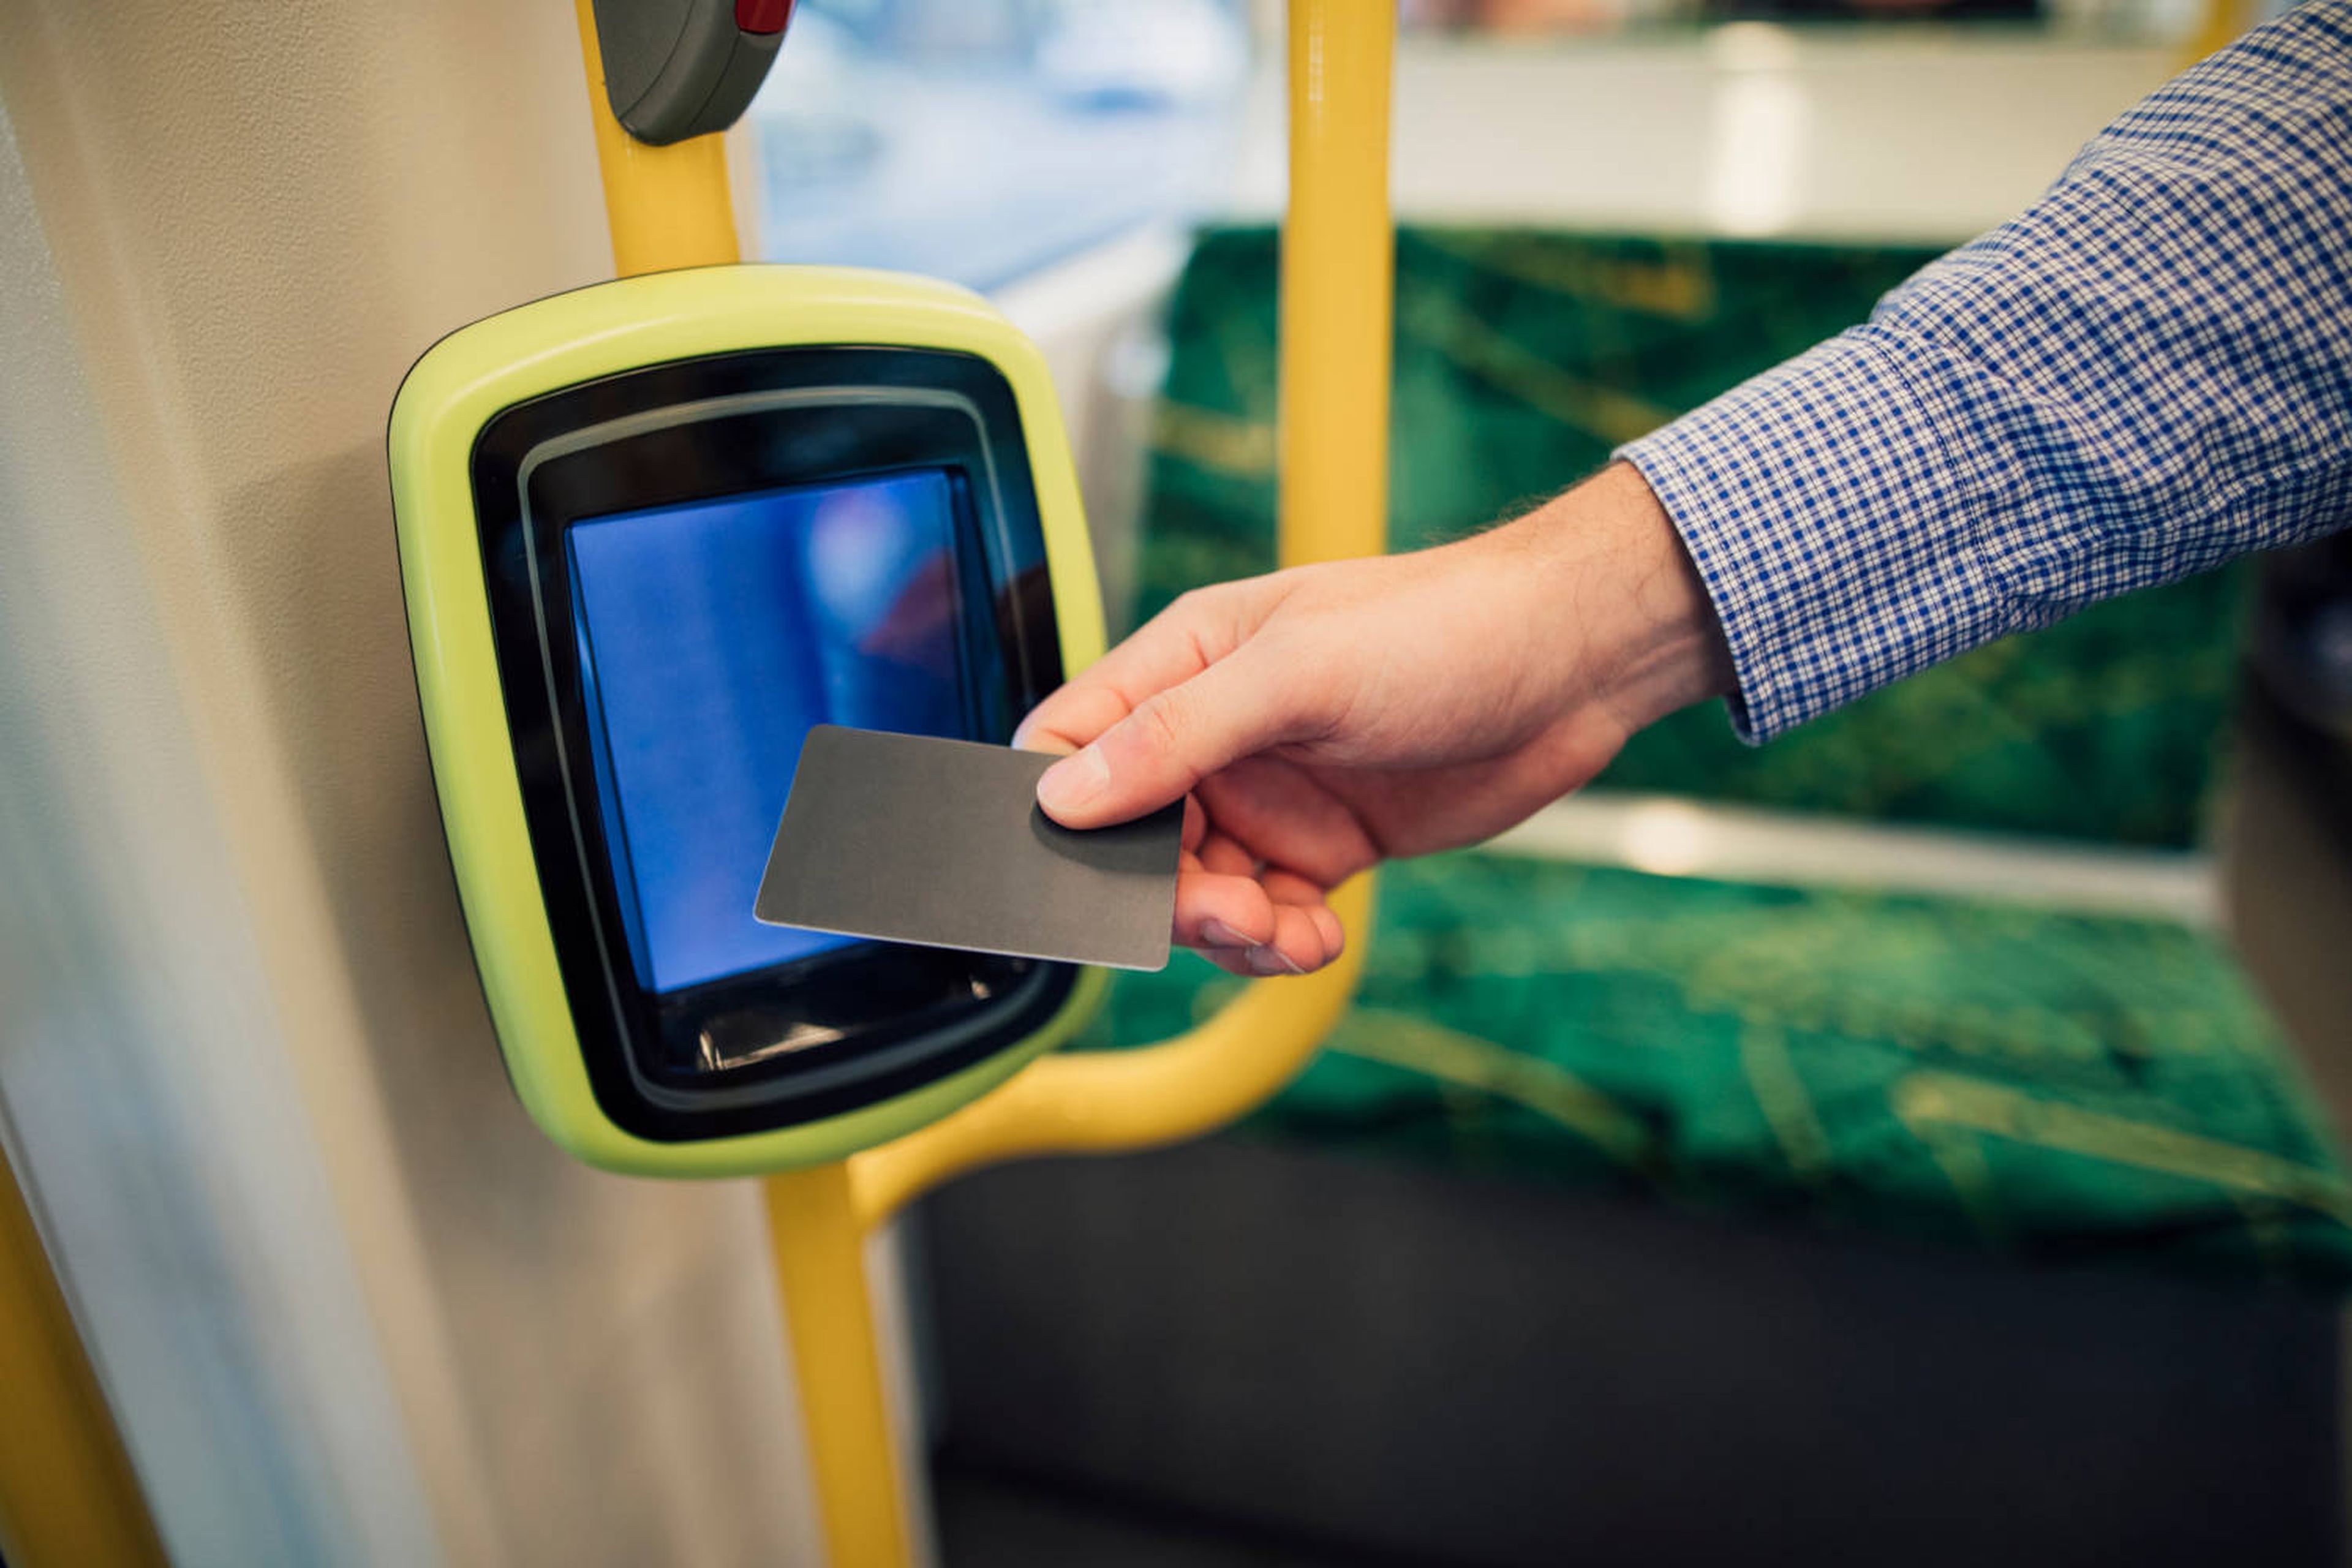 Pago contactless con tarjet autobús